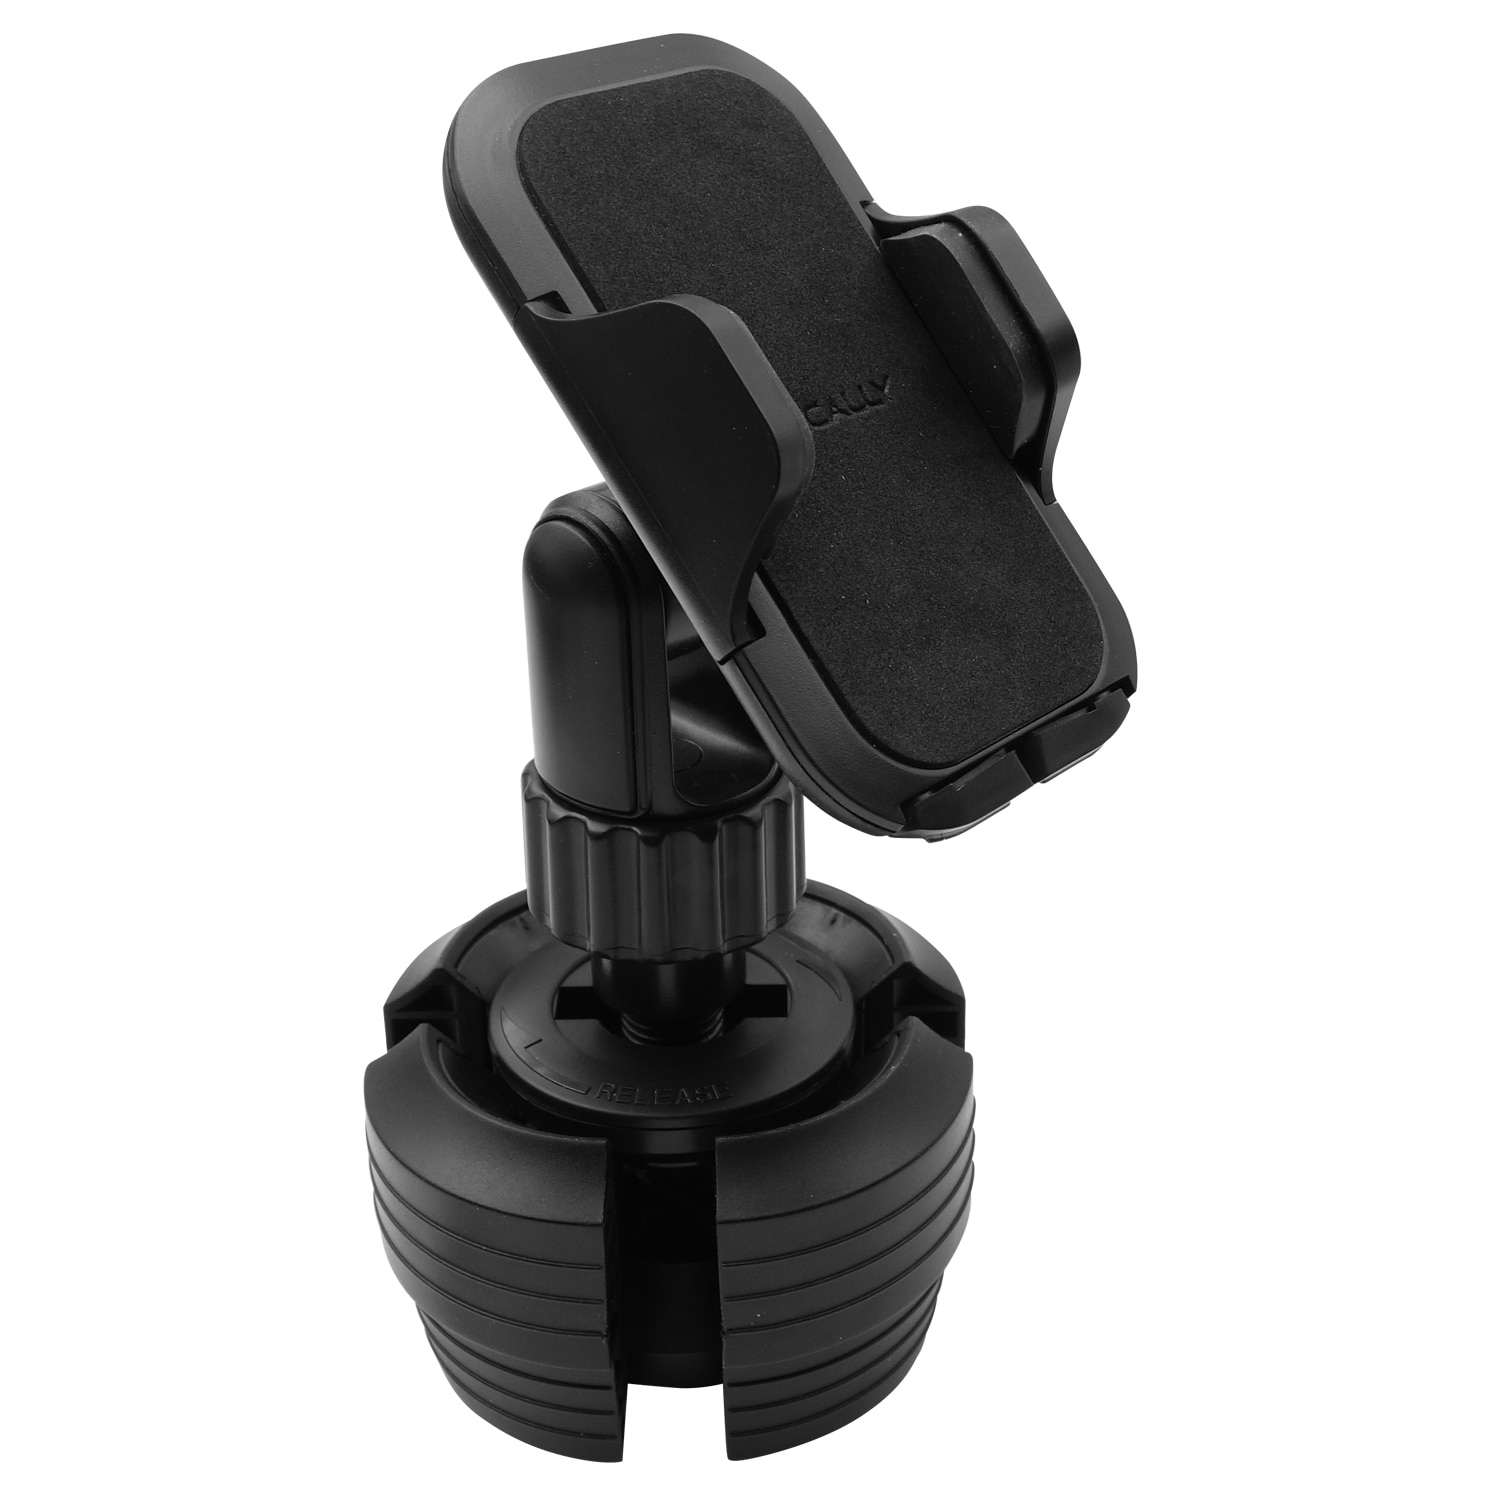 ToughTested Boom Adjustable Mobile Cup Holder Mount for Most Cell